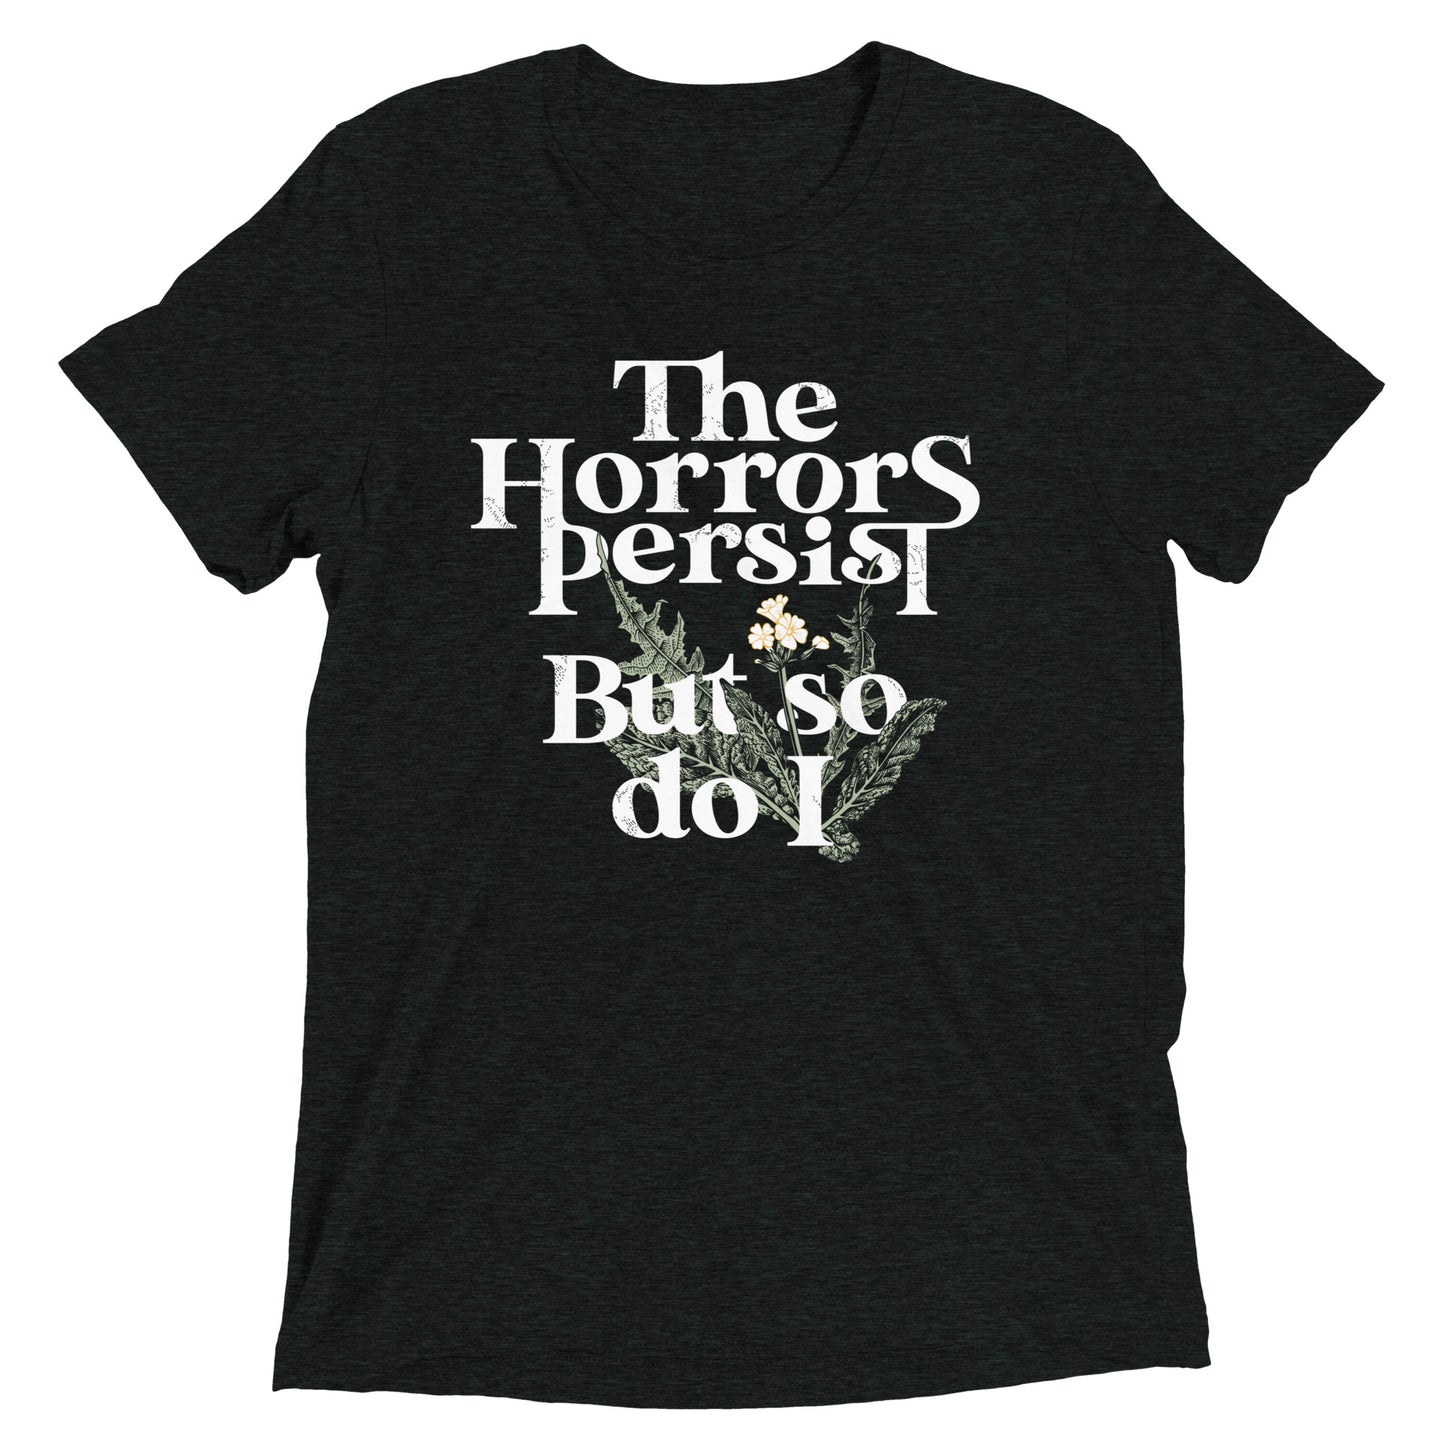 The Horrors Persist But So Do I Men's Tri-Blend Tee